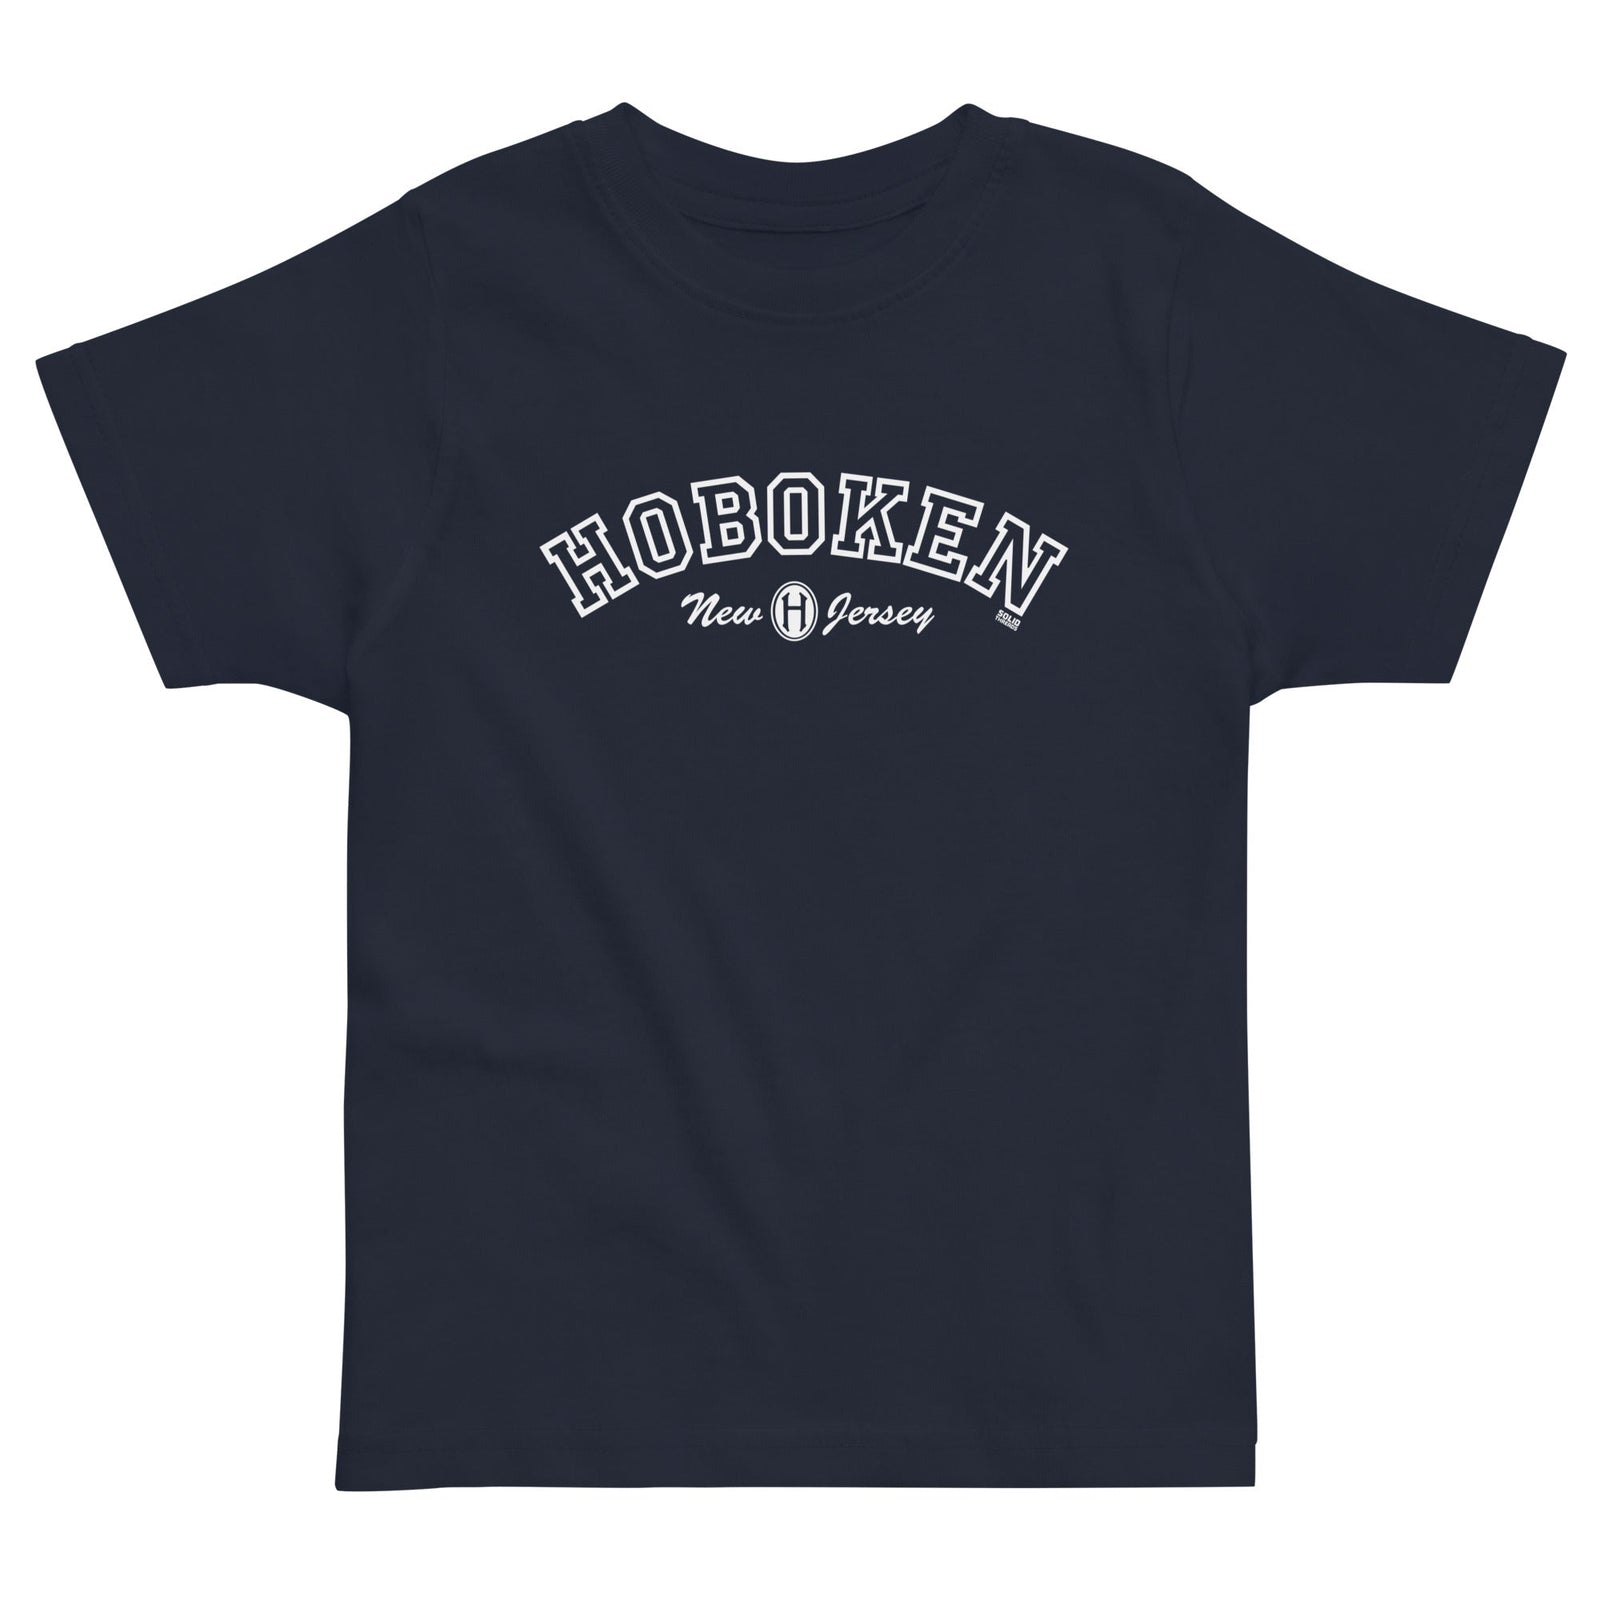 Toddler's Hoboken Collegiate Cool Extra Soft T-Shirt | Retro New Jersey Tee | Solid Threads